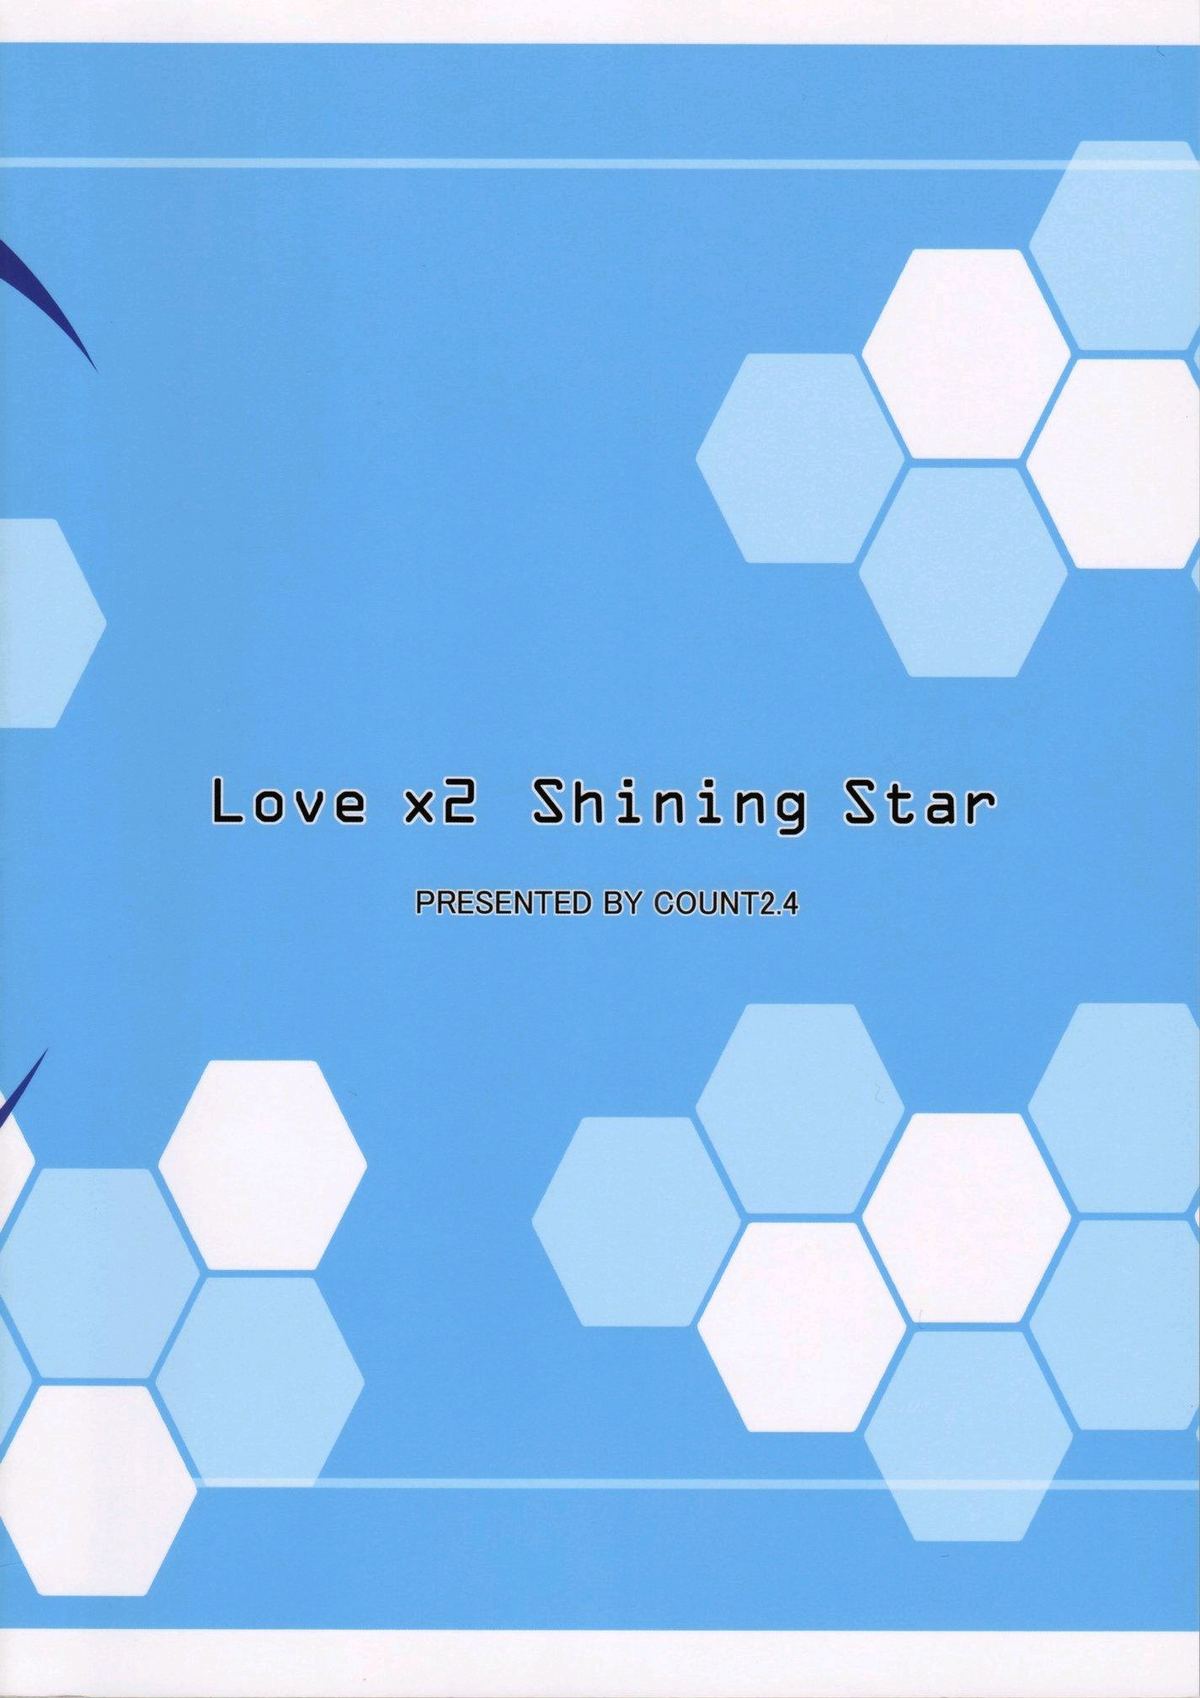 (C75) [COUNT2.4] Love x2 Shining Star (THE iDOLM@STER) (C75) [COUNT2.4] Love x2 Shining Star (アイドルマスタ)